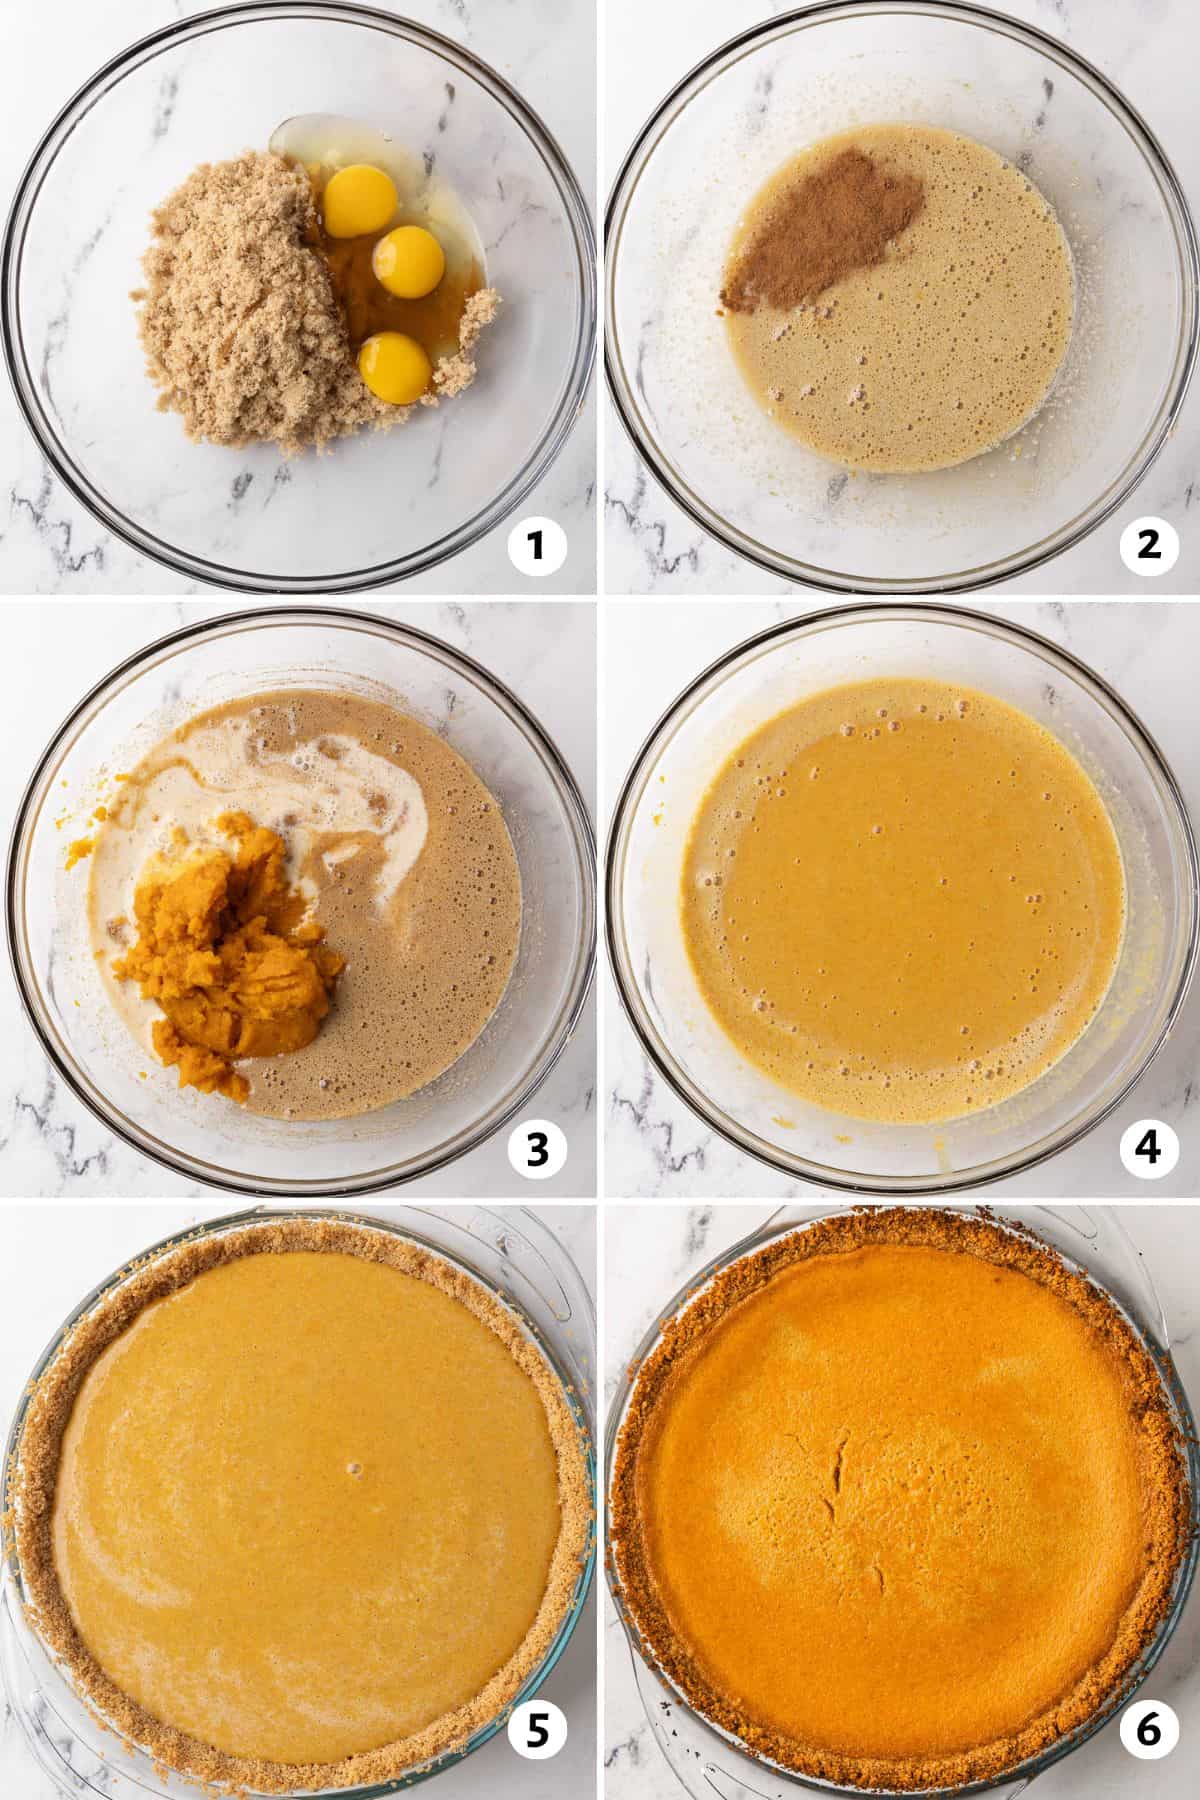 6 image collage making pie filling: 1- brown sugar and eggs in bowl before mixing, 2- after mixing with spices added, 3- pumpkin and milk added, 4- mixture completely combined, 5- filling added to prepared graham cracker crust before baking, 6- after baking.